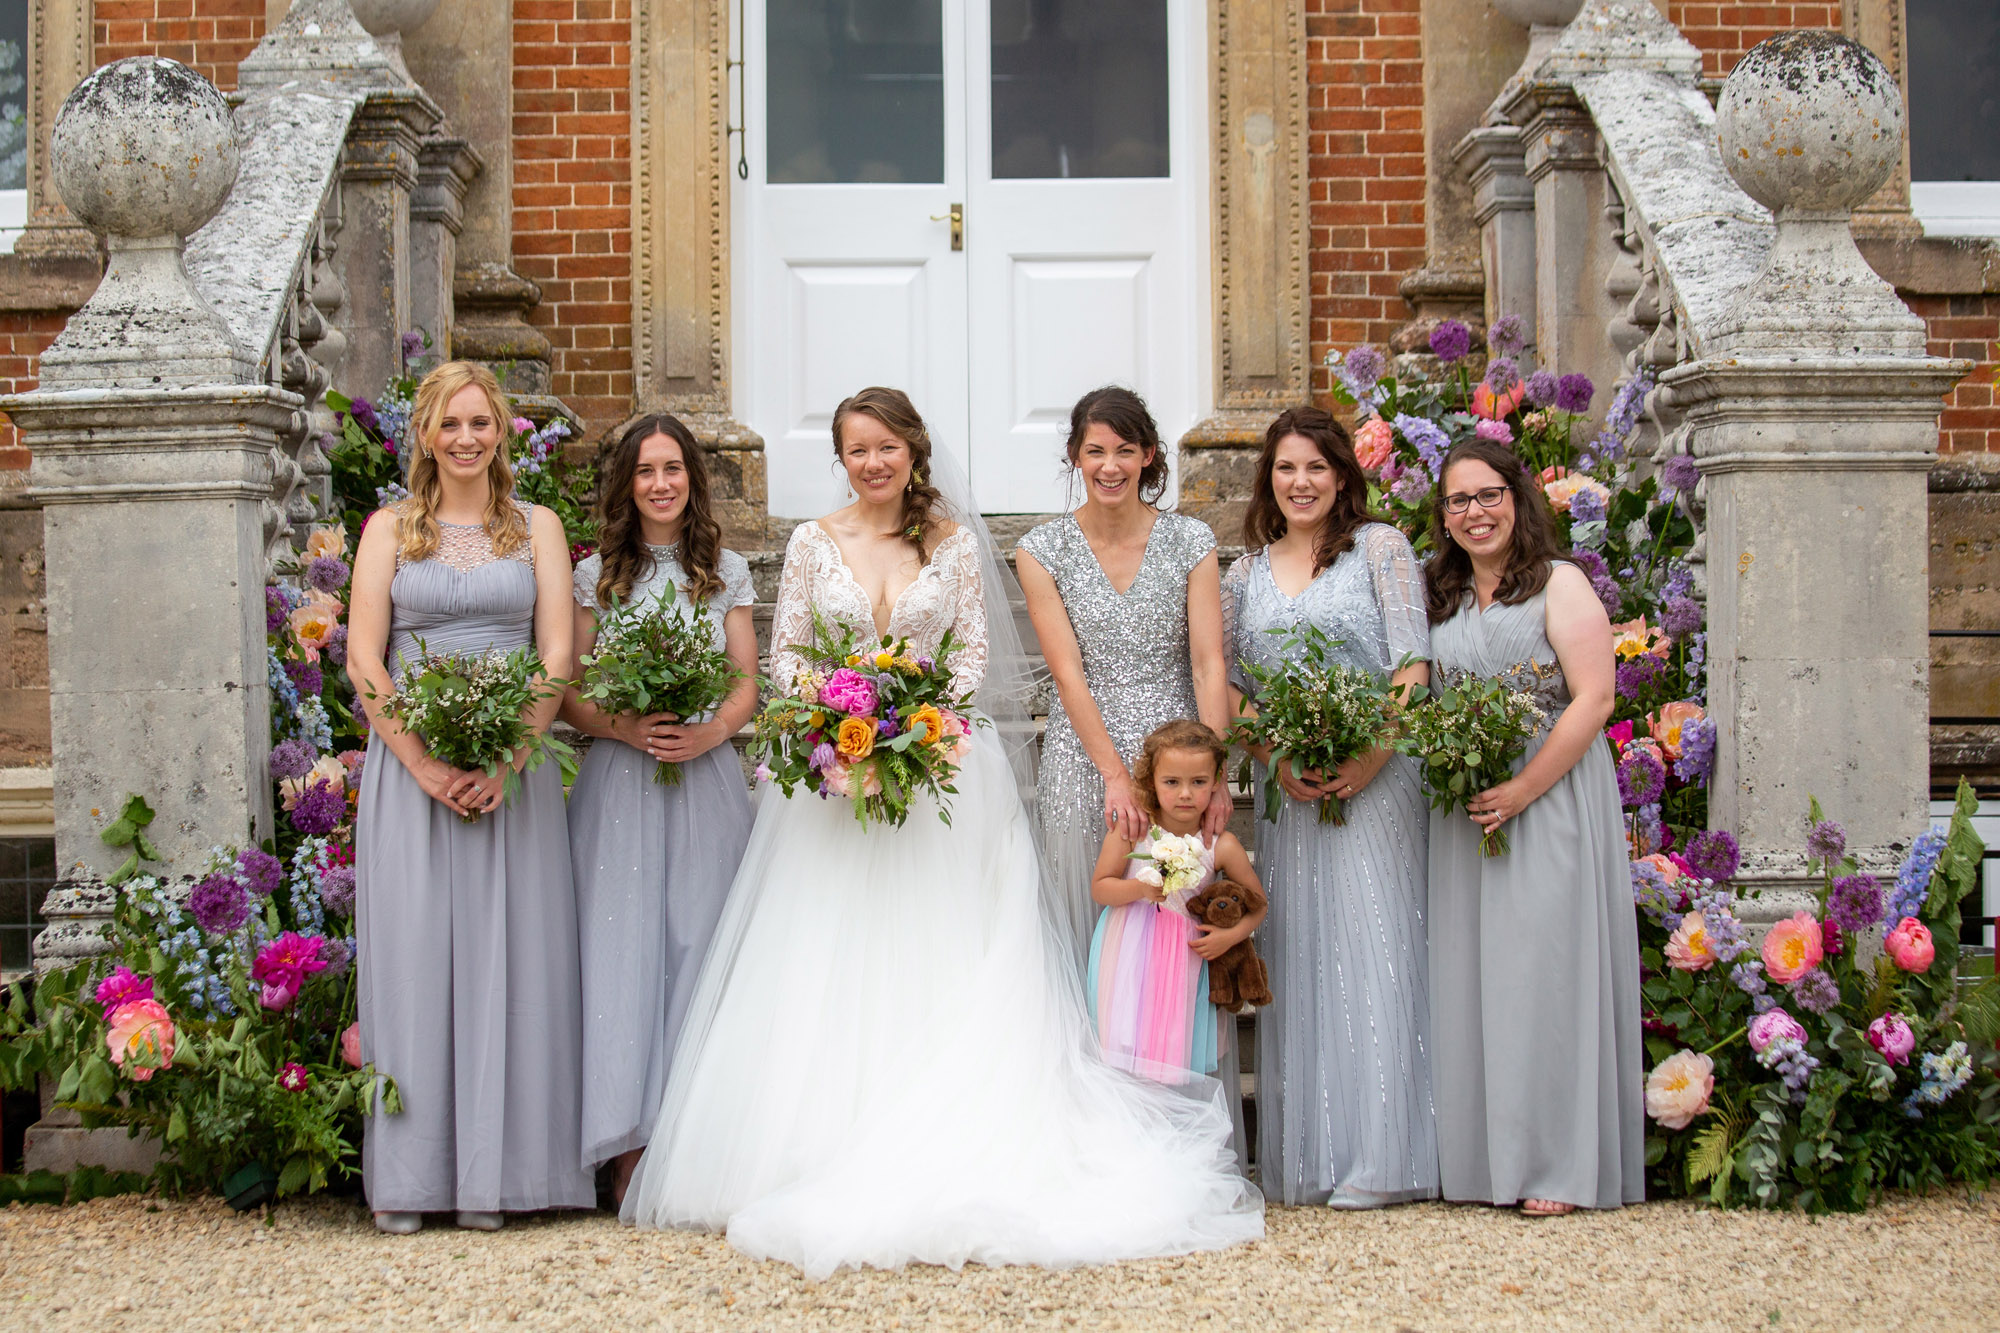 A gloriously colourful and fun wedding at Crowcombe Court with stunning florals, images by Somerset photographer Martin Dabek